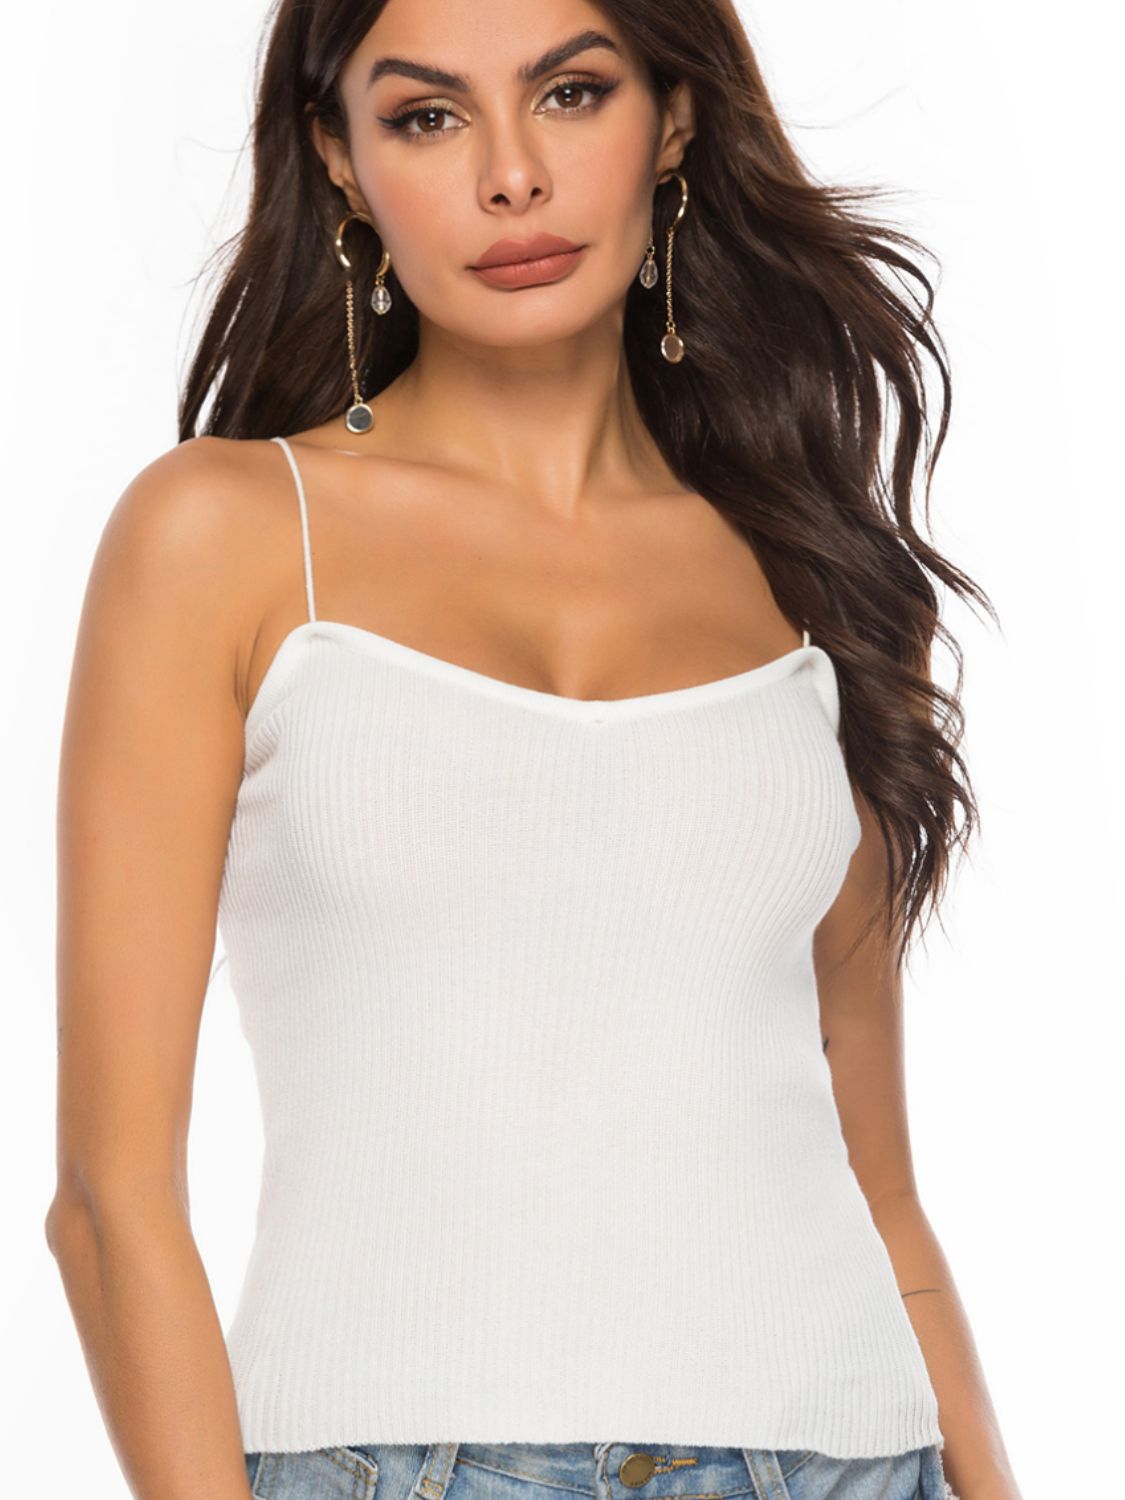 Sweetheart Neck Knit Cami - White / S - Tops & Tees - Shirts & Tops - 9 - 2024